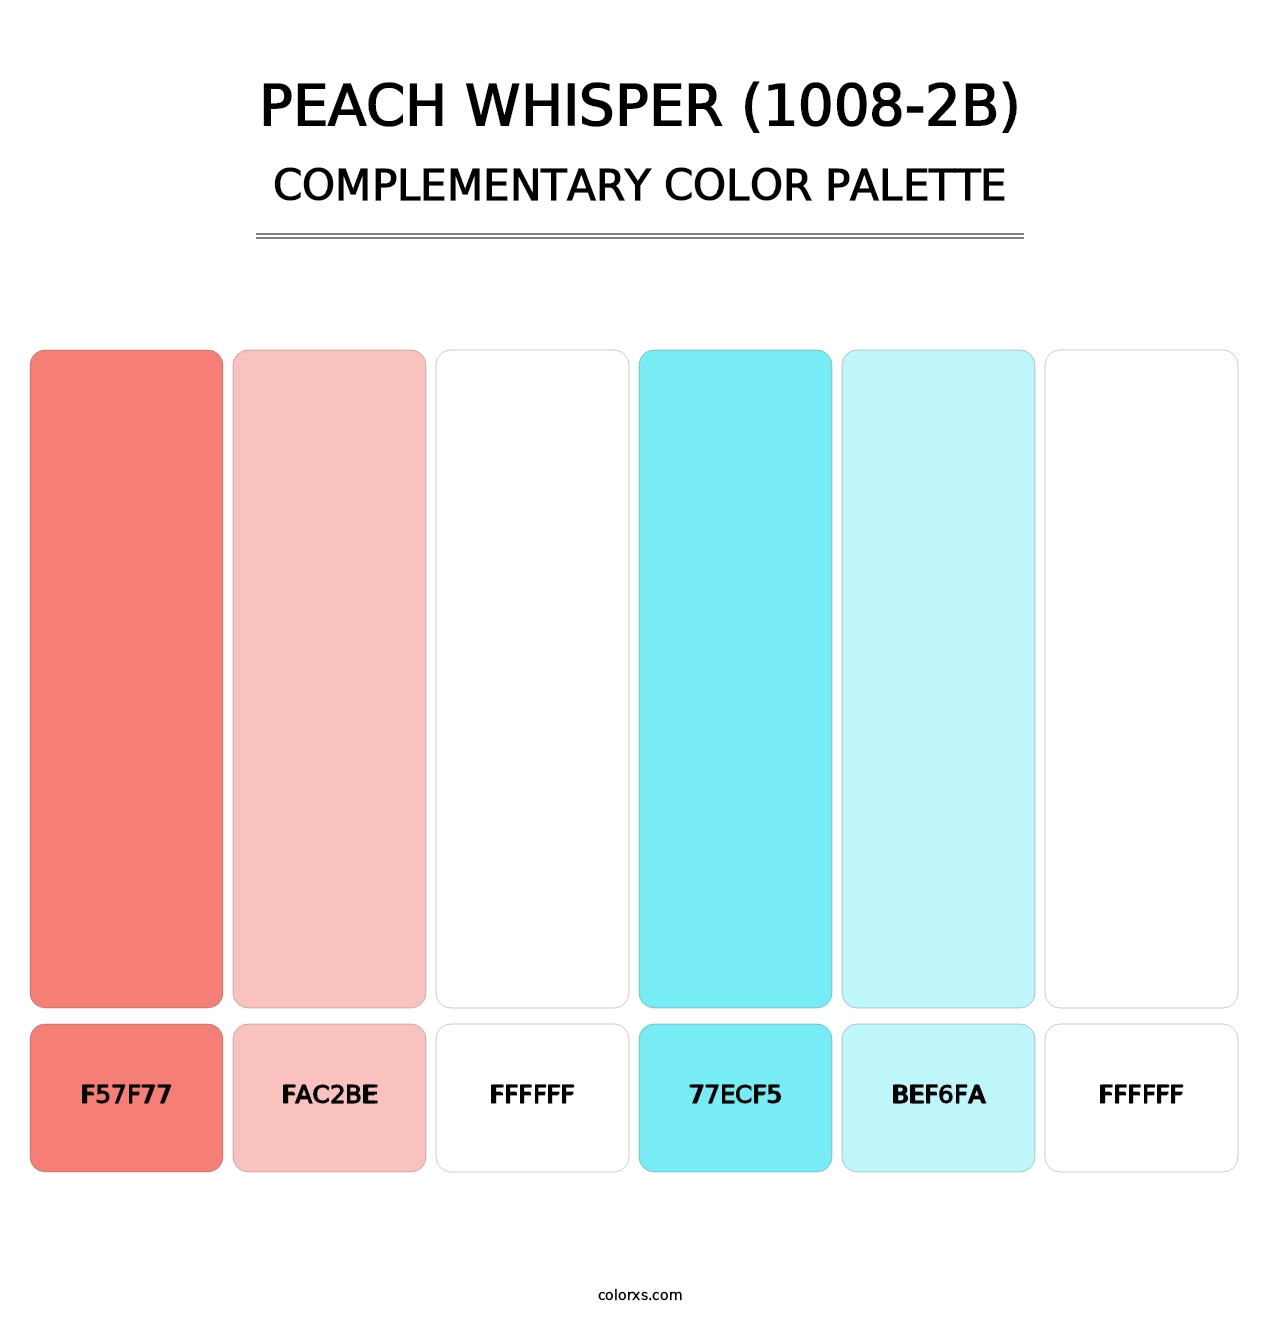 Peach Whisper (1008-2B) - Complementary Color Palette